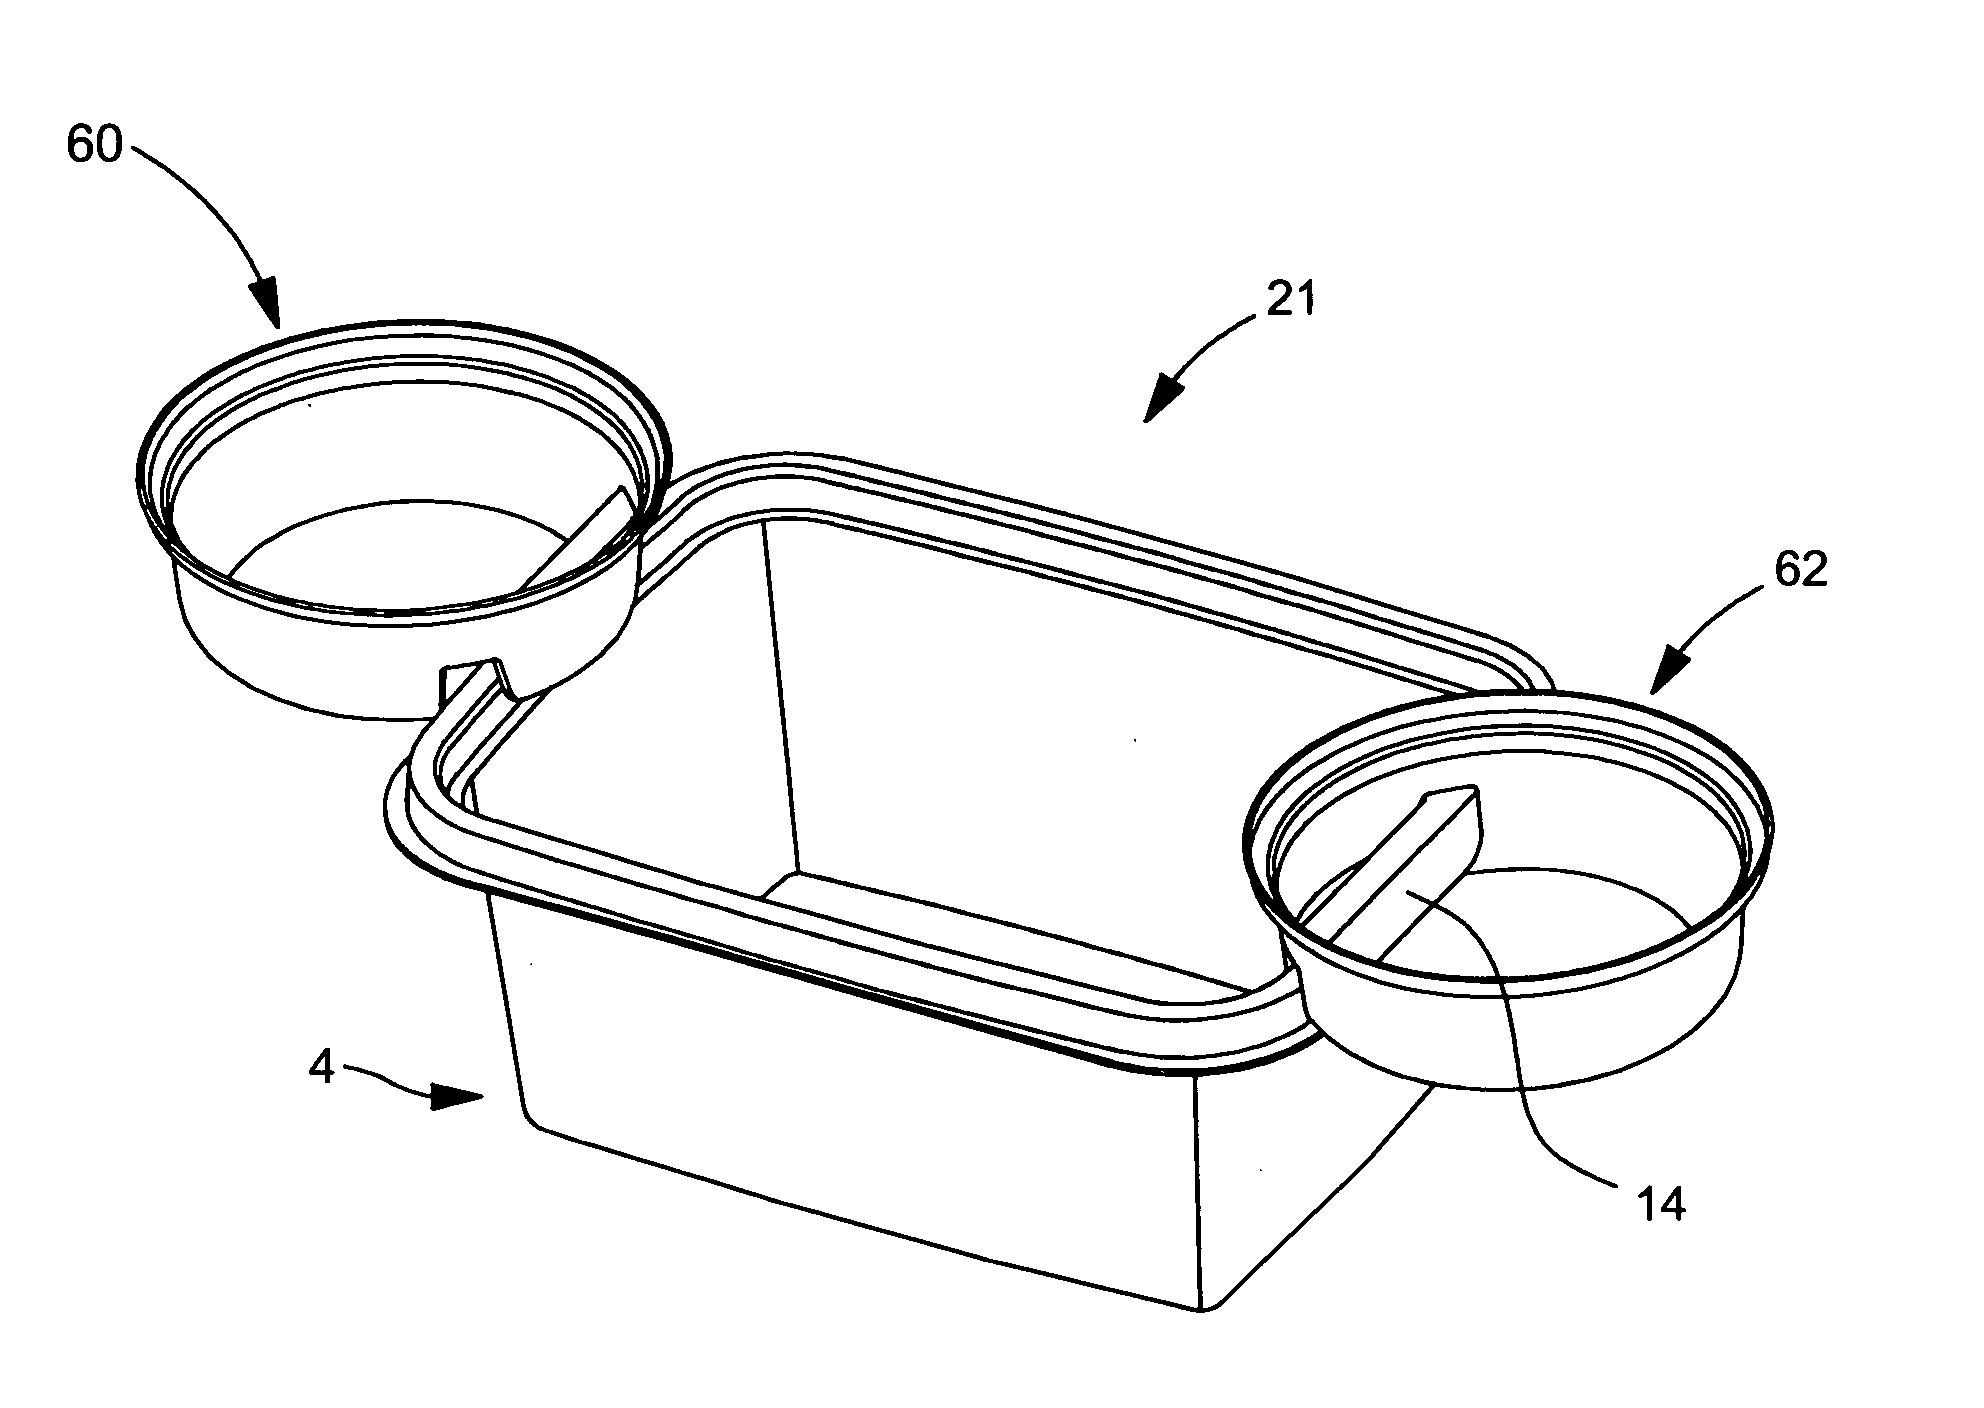 Interconnecting food container system